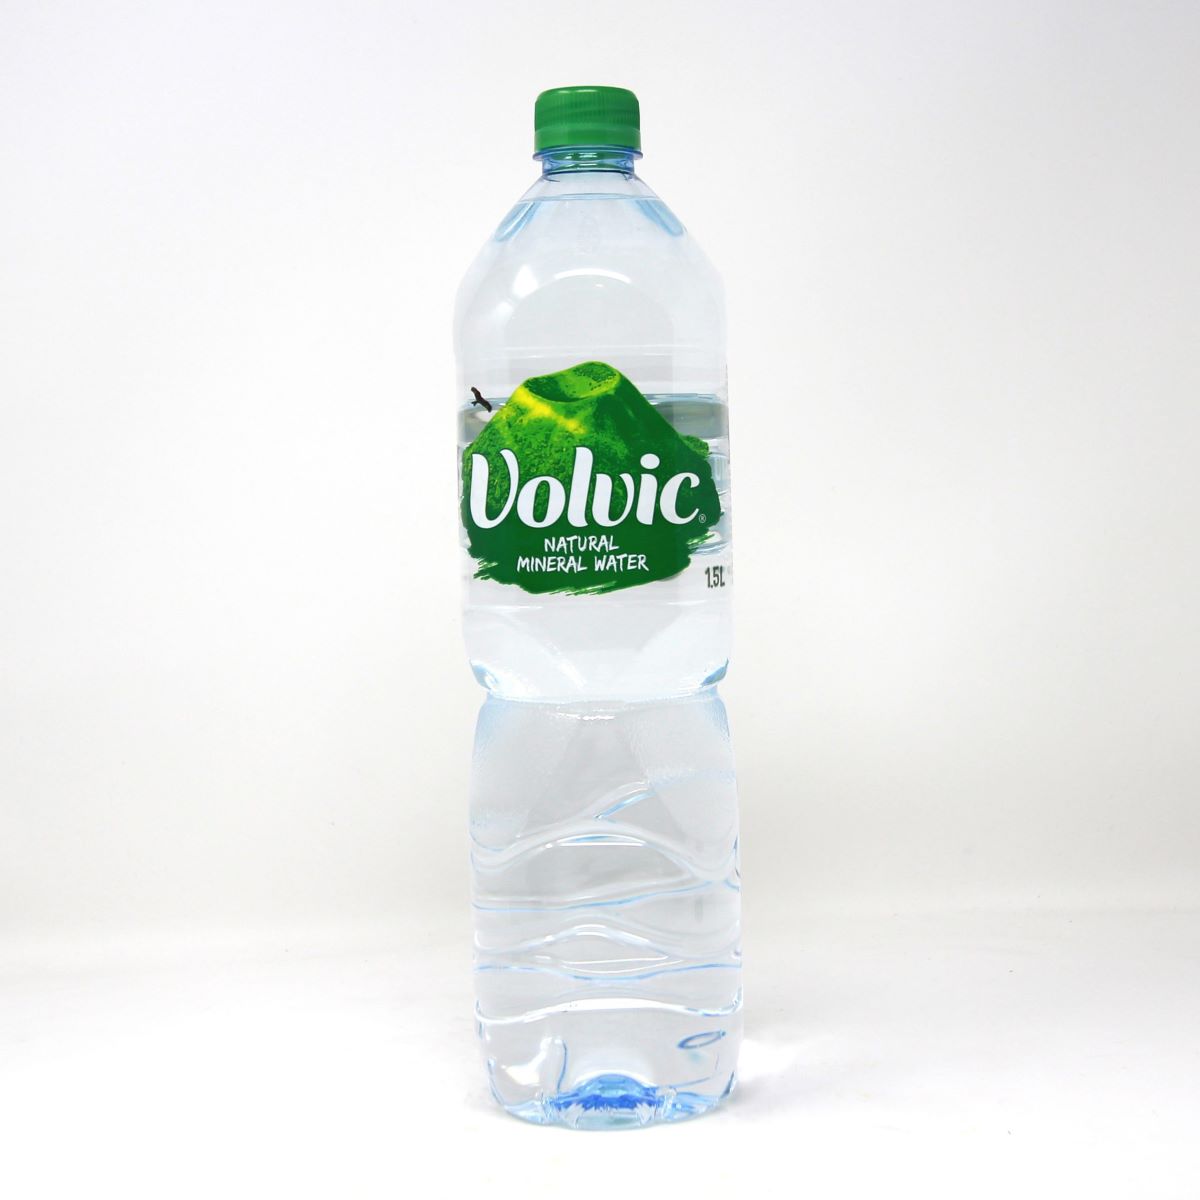 Volvic Natural Mineral Water 1.5L